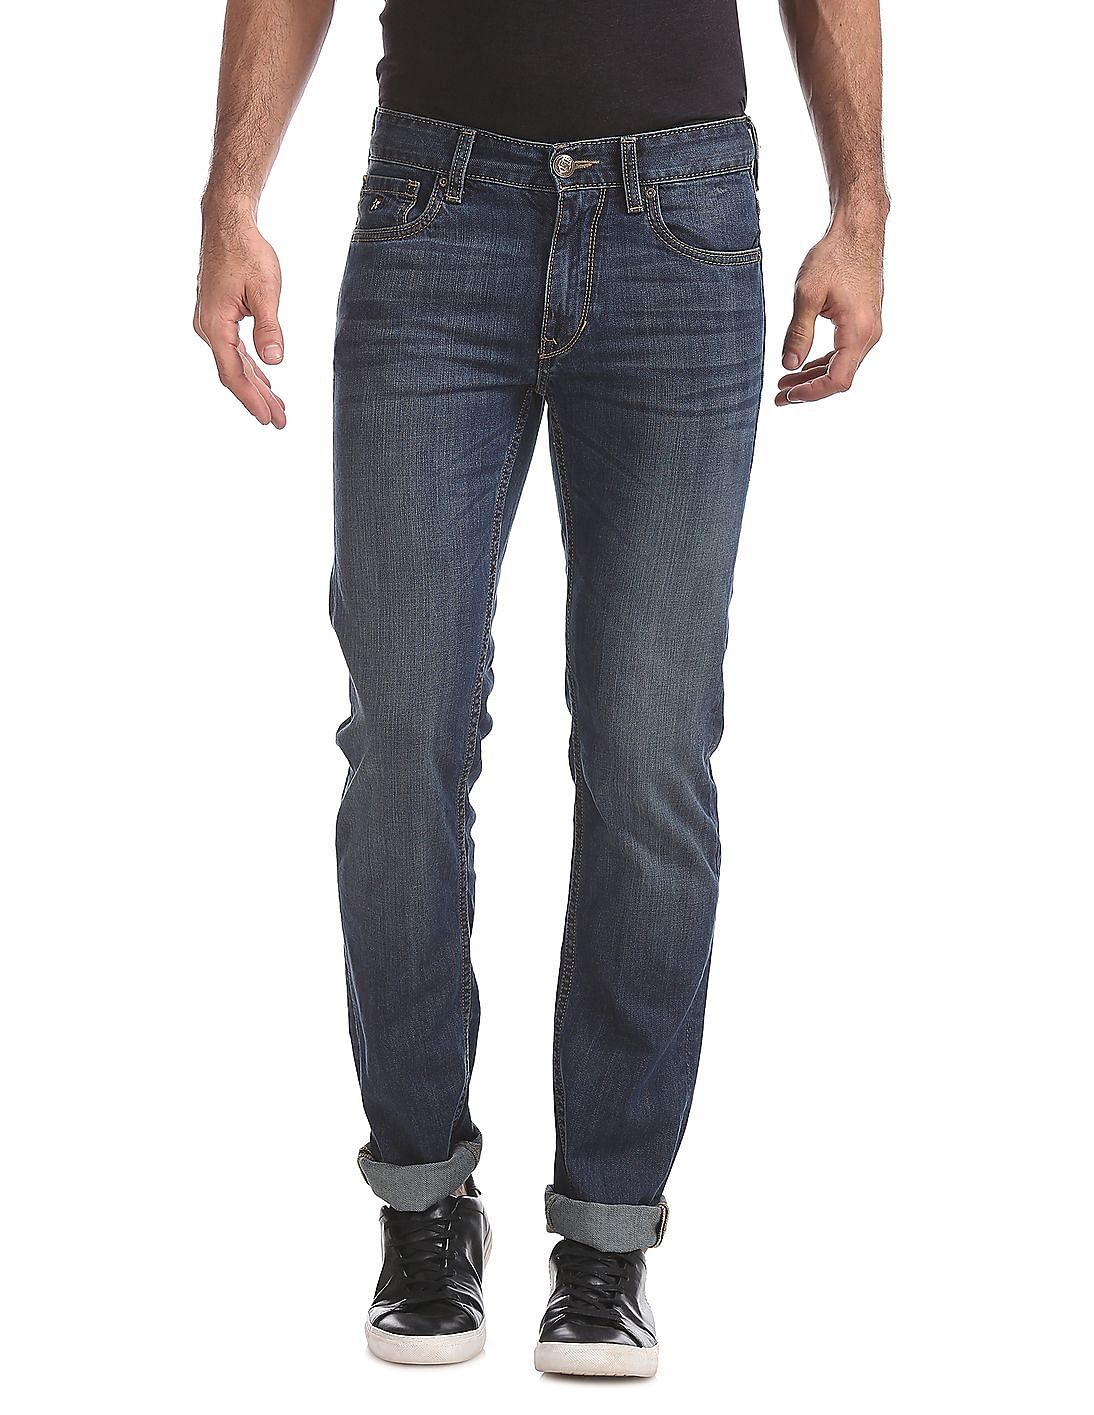 Buy Men Slim Tapered Fit Stone Wash Jeans online at NNNOW.com